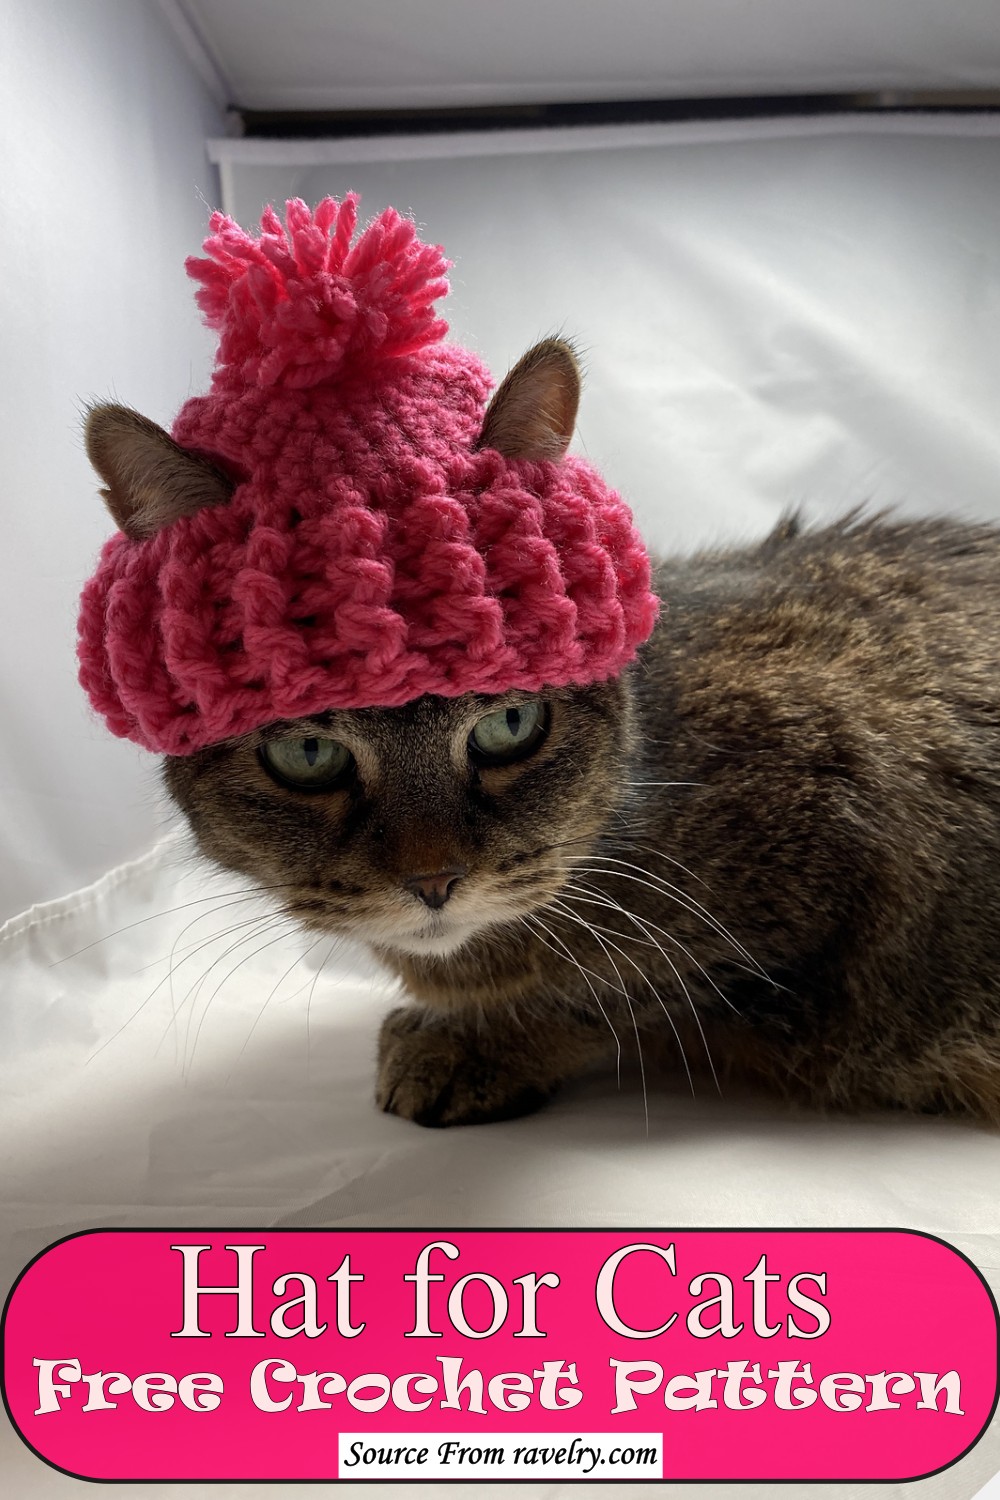 Hat for Cats